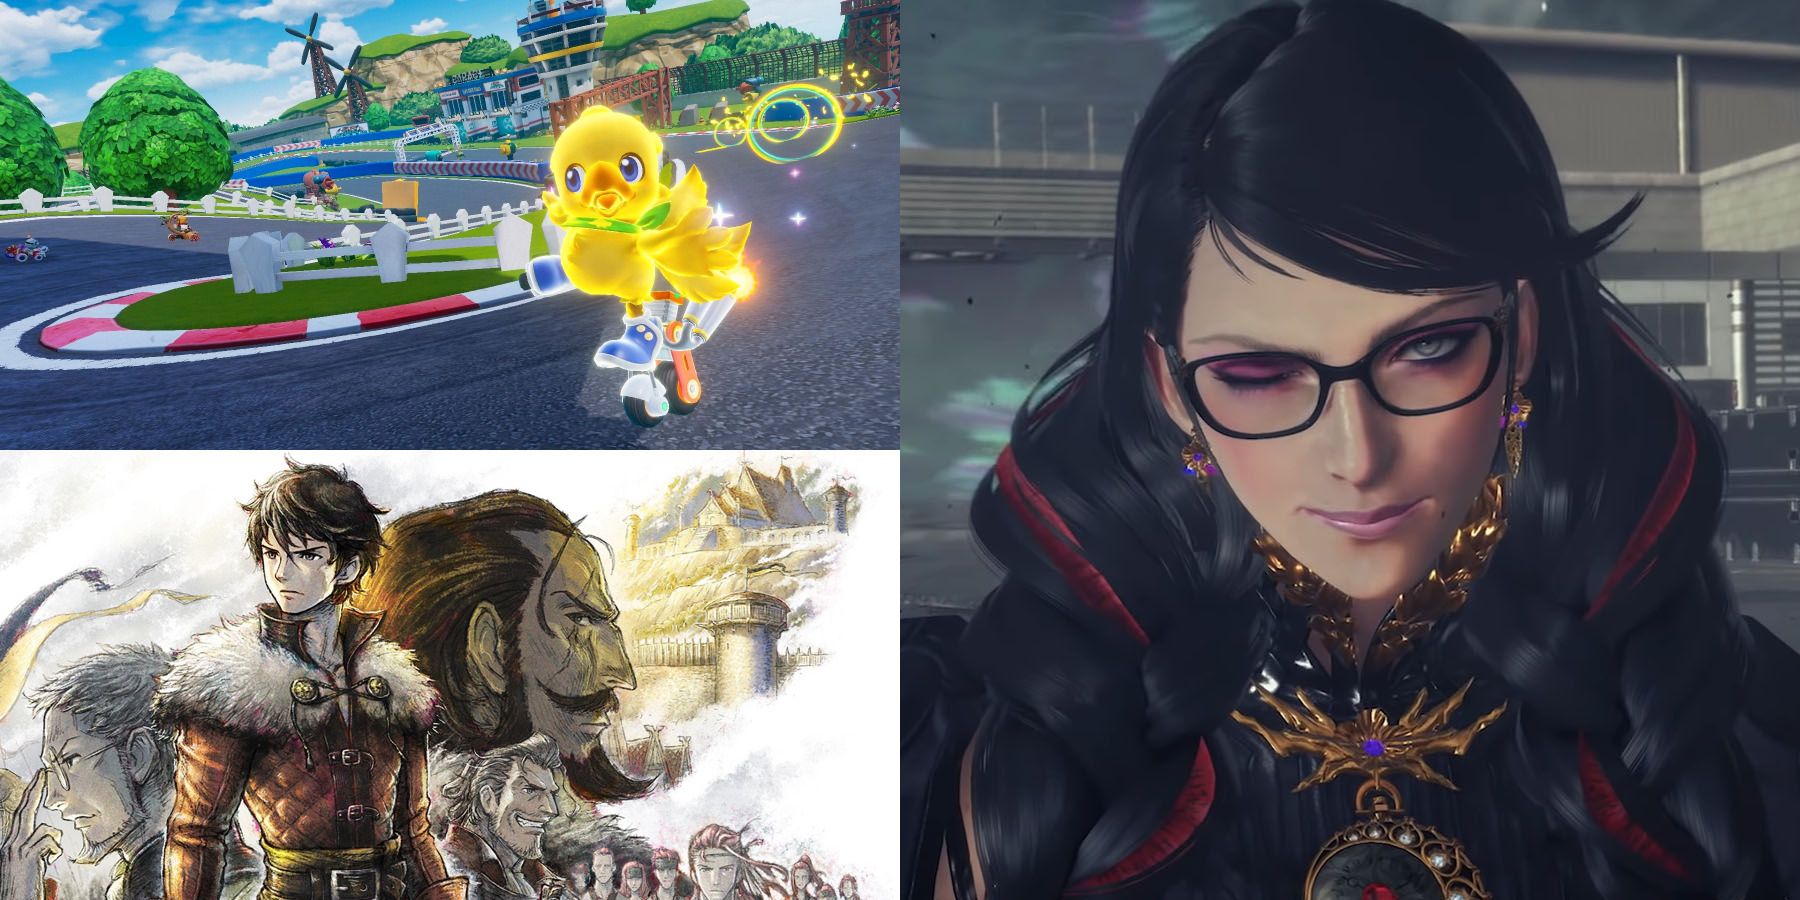 2022 Third Party Switch Exclusives Bayonetta 3, Triangle Strategy, Chocobo GP